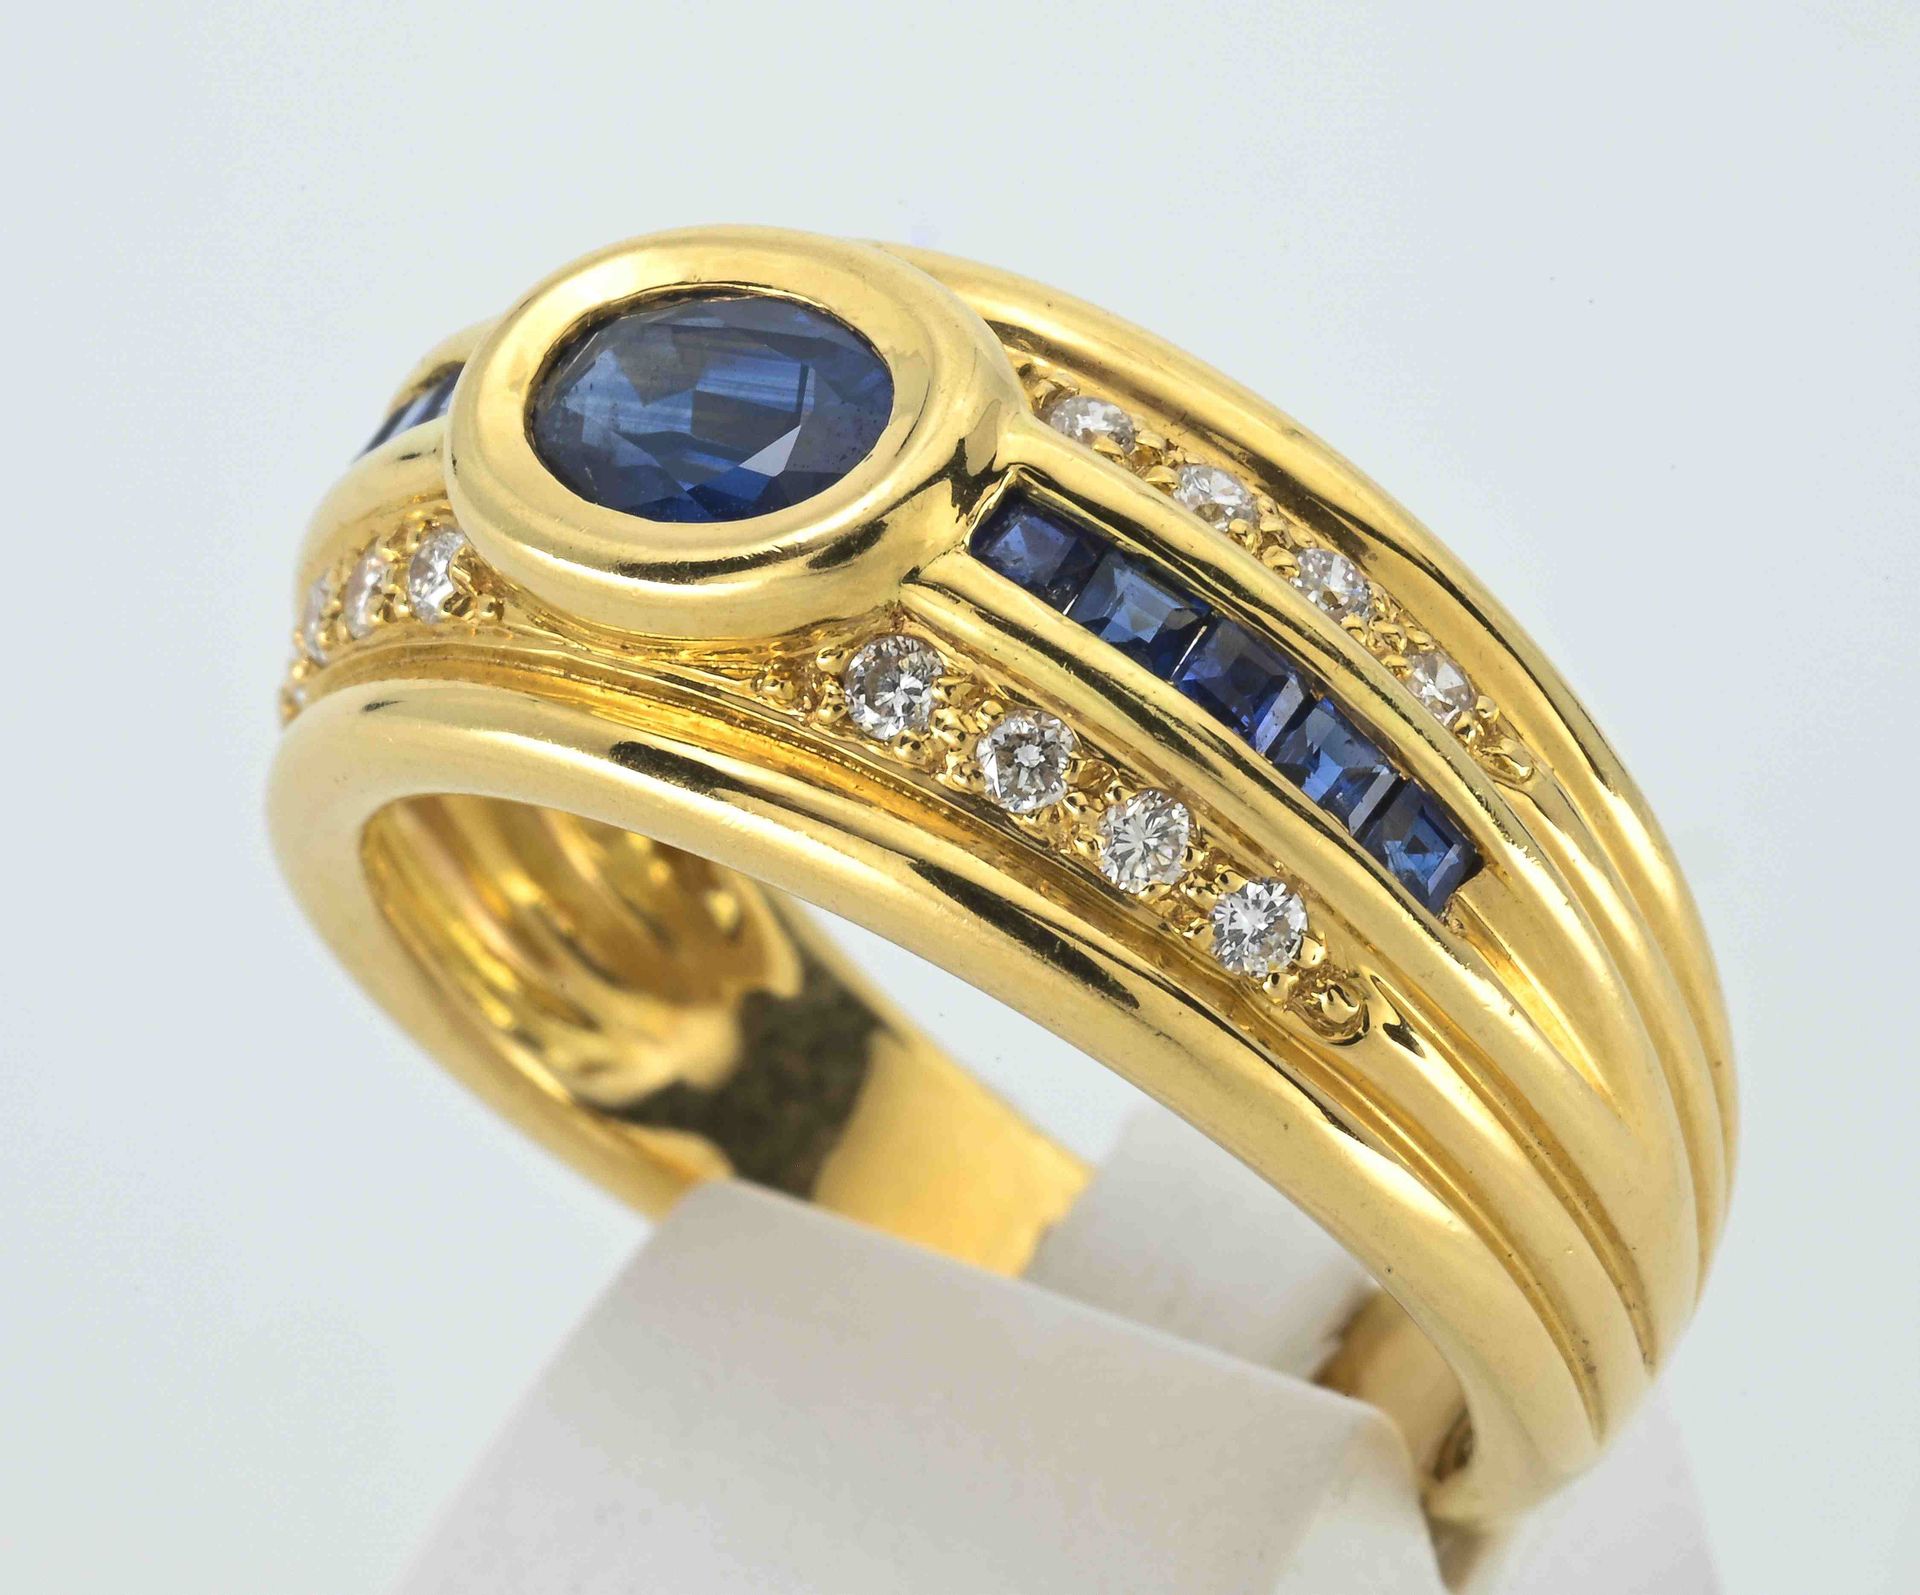 Null Ring bulging yellow gold 750°°° decorated with 10 sapphires
calibrated, cen&hellip;